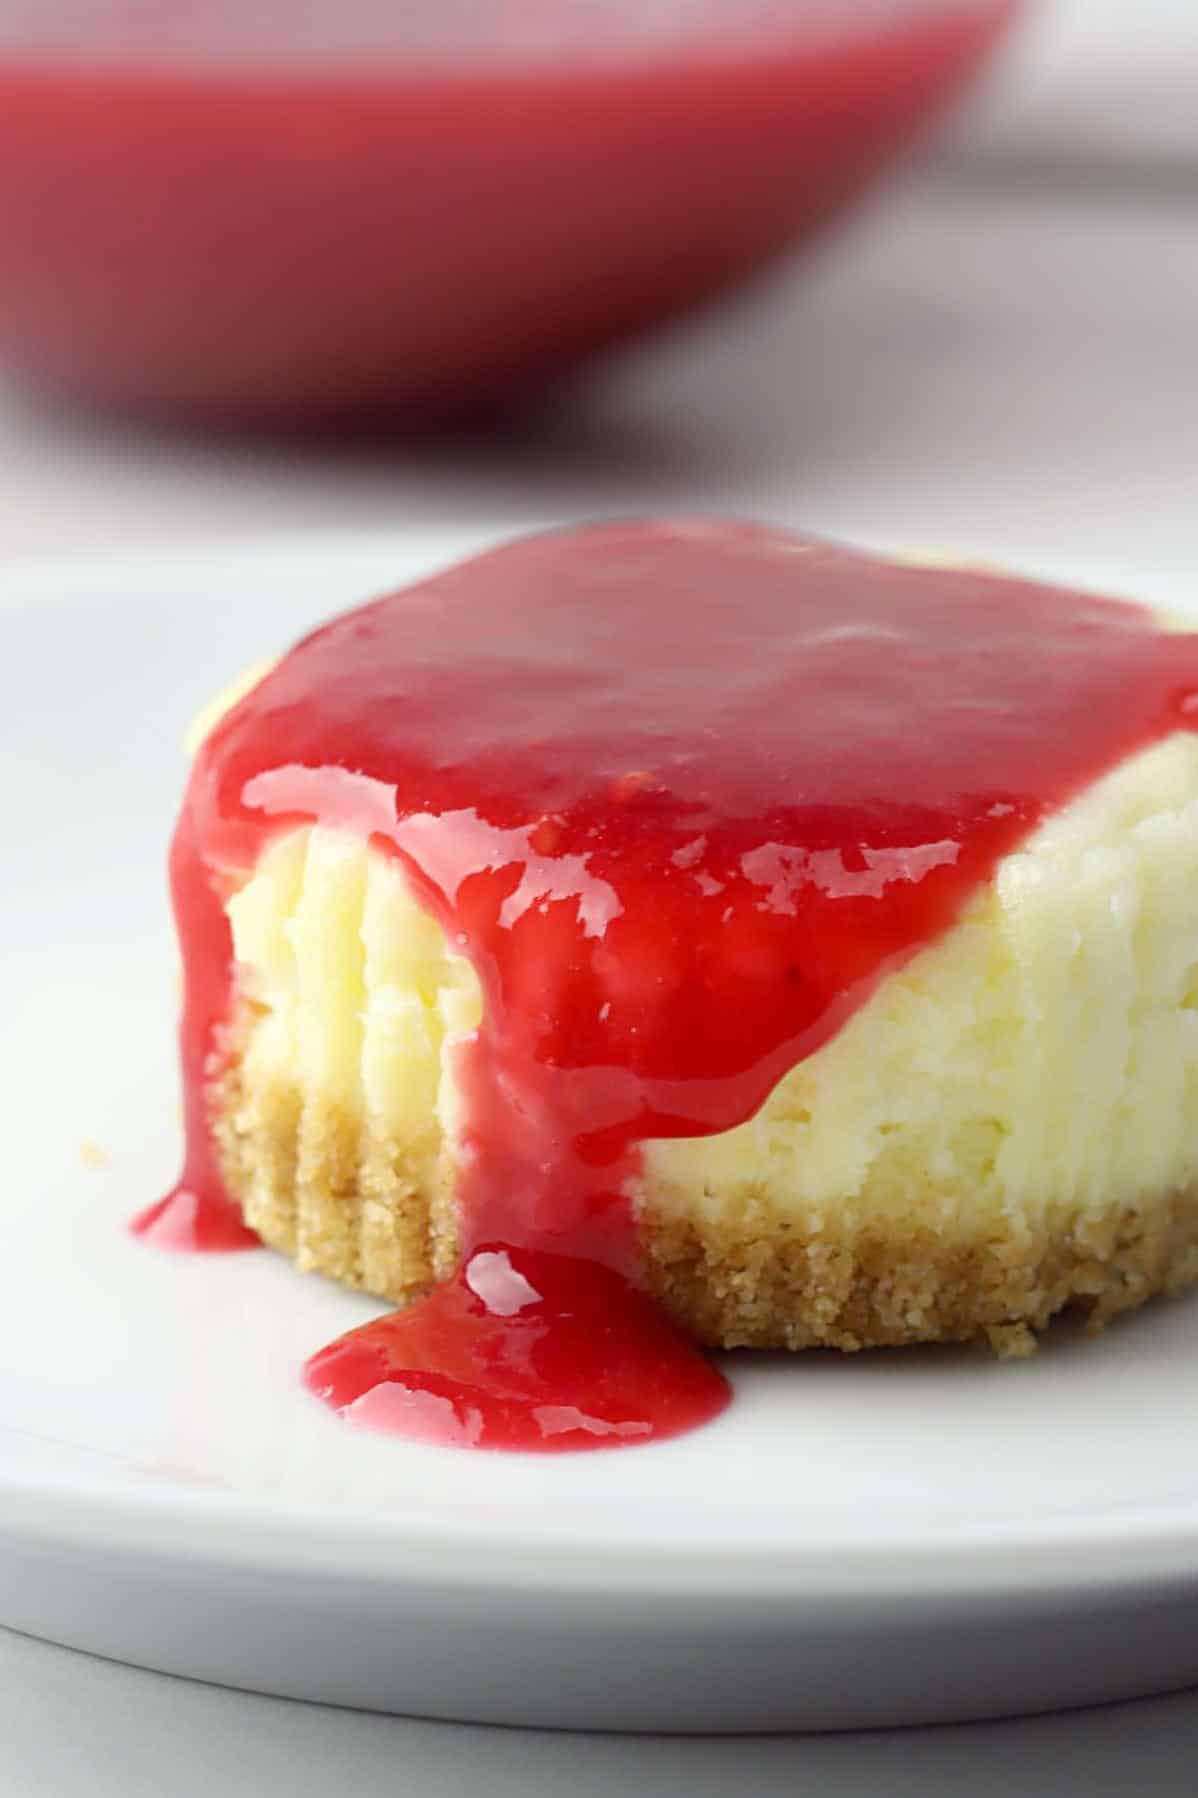  Topped with a vibrant raspberry sauce, this showstopper will have guests begging for the recipe